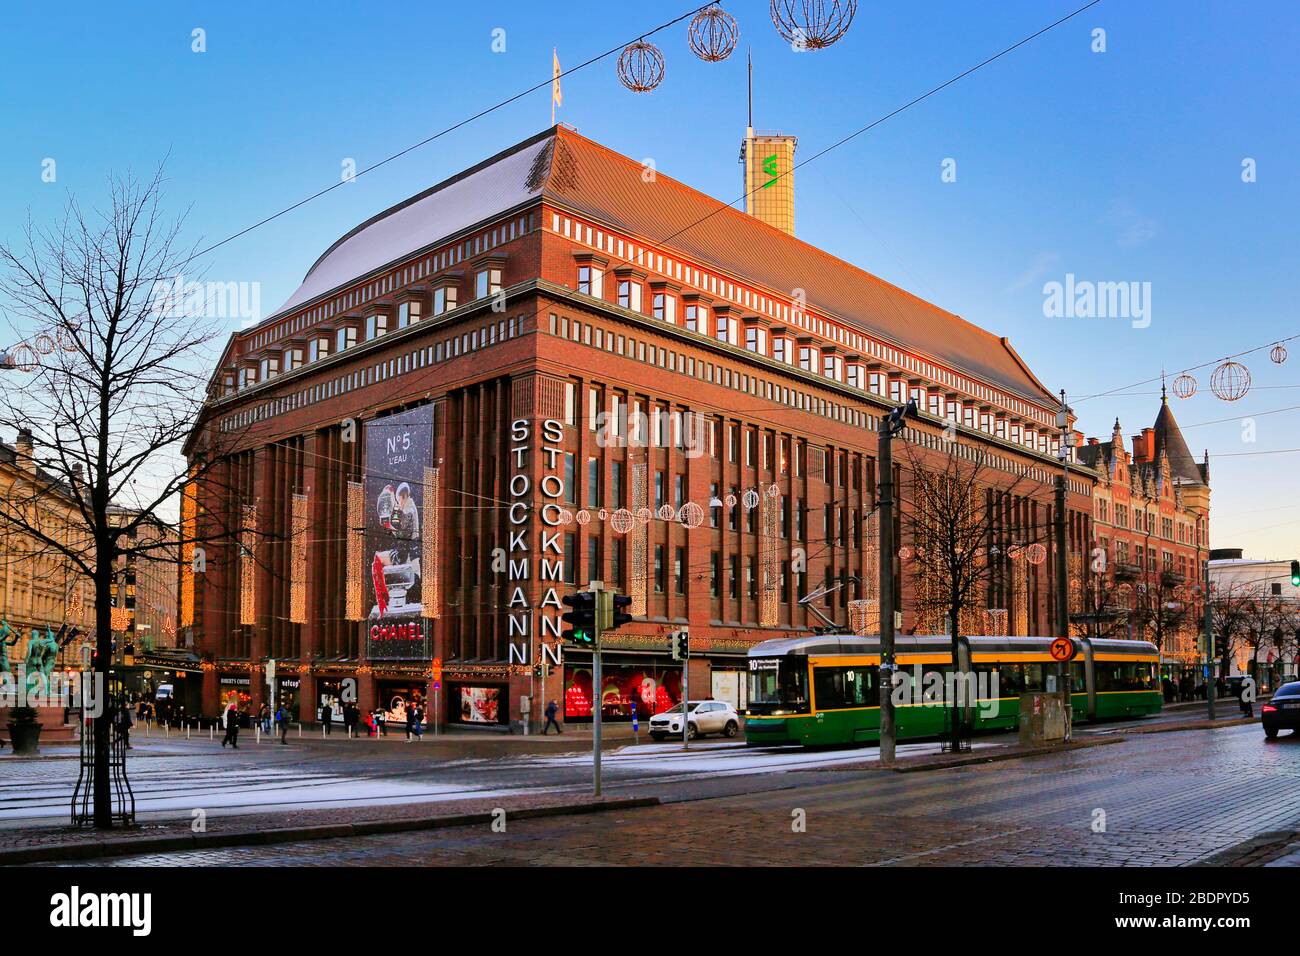 Stockmann Helsinki Centre, culturally significant business building and department store in central Helsinki, Finland in winter dusk. Dec 3, 2019. Stock Photo